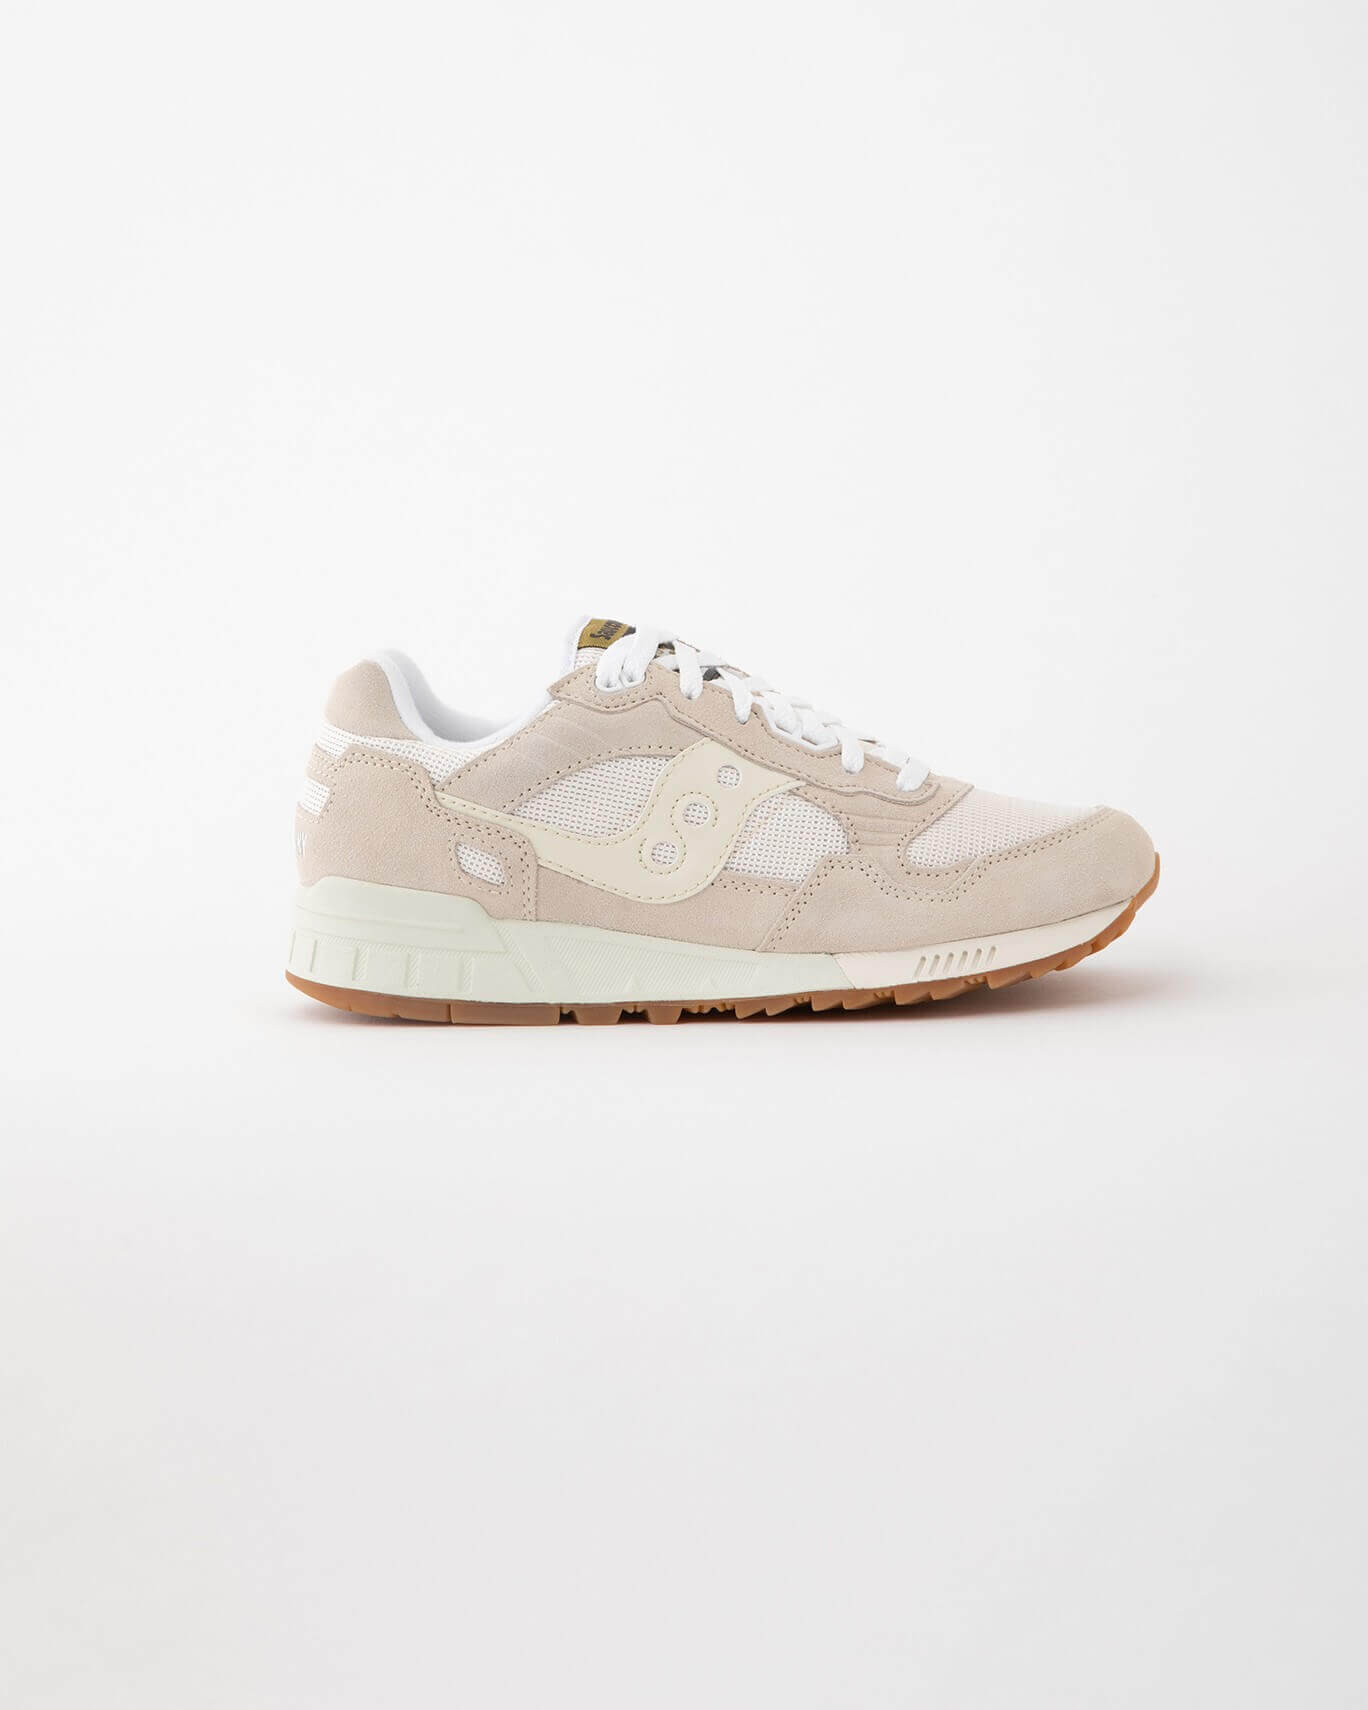 saucony guide iso 2 2015